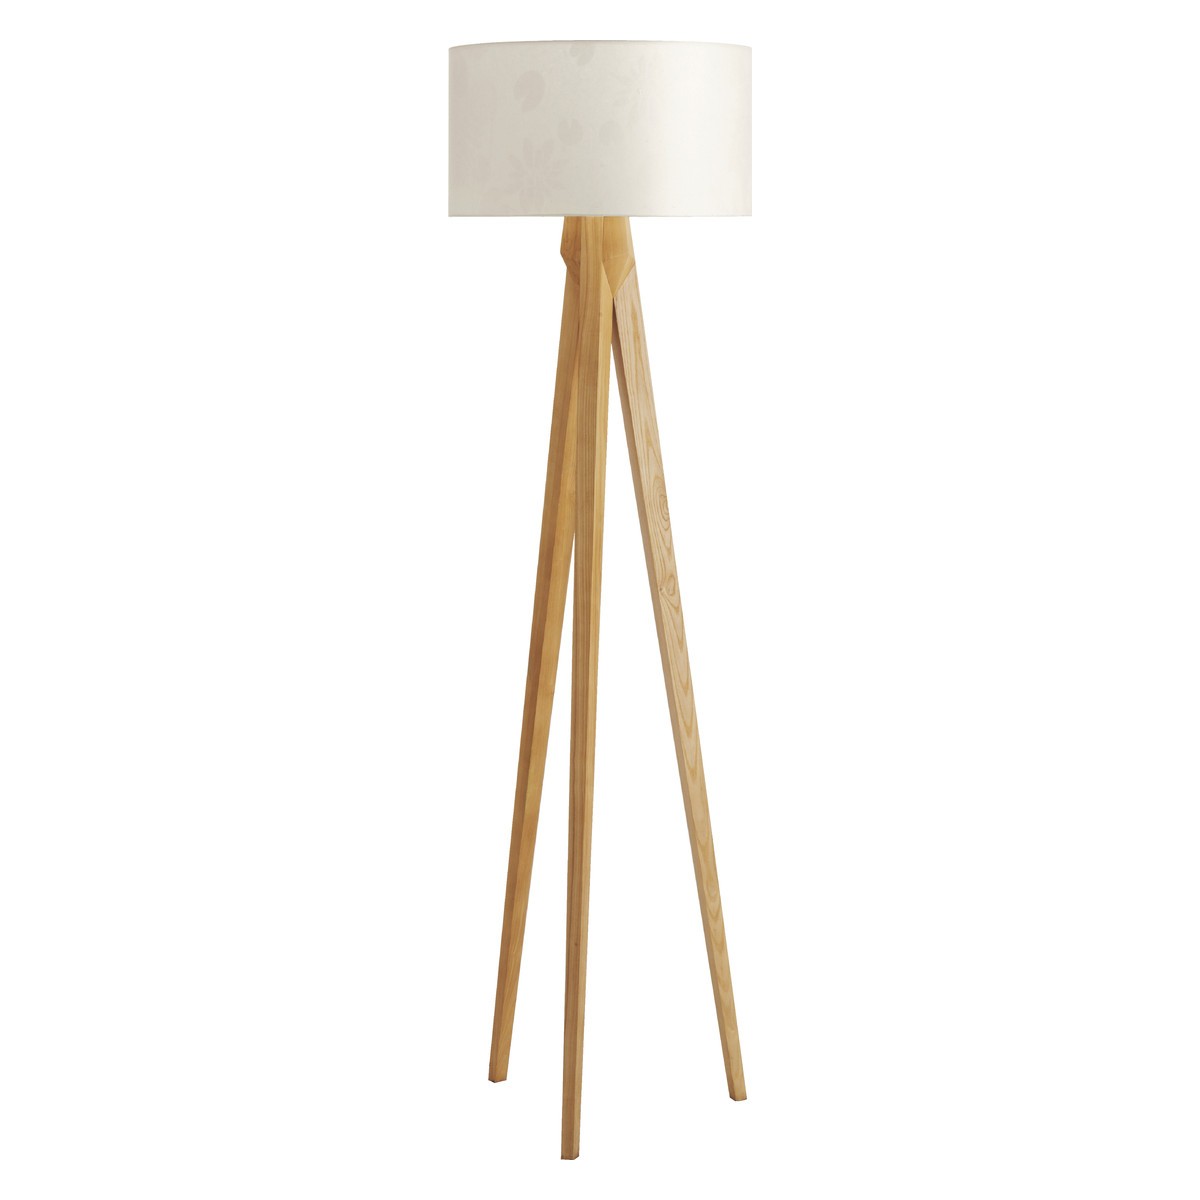 Care Instructions. Wipe clean with a dry cloth. TRIPOD OAK Wooden floor lamp  with white shade